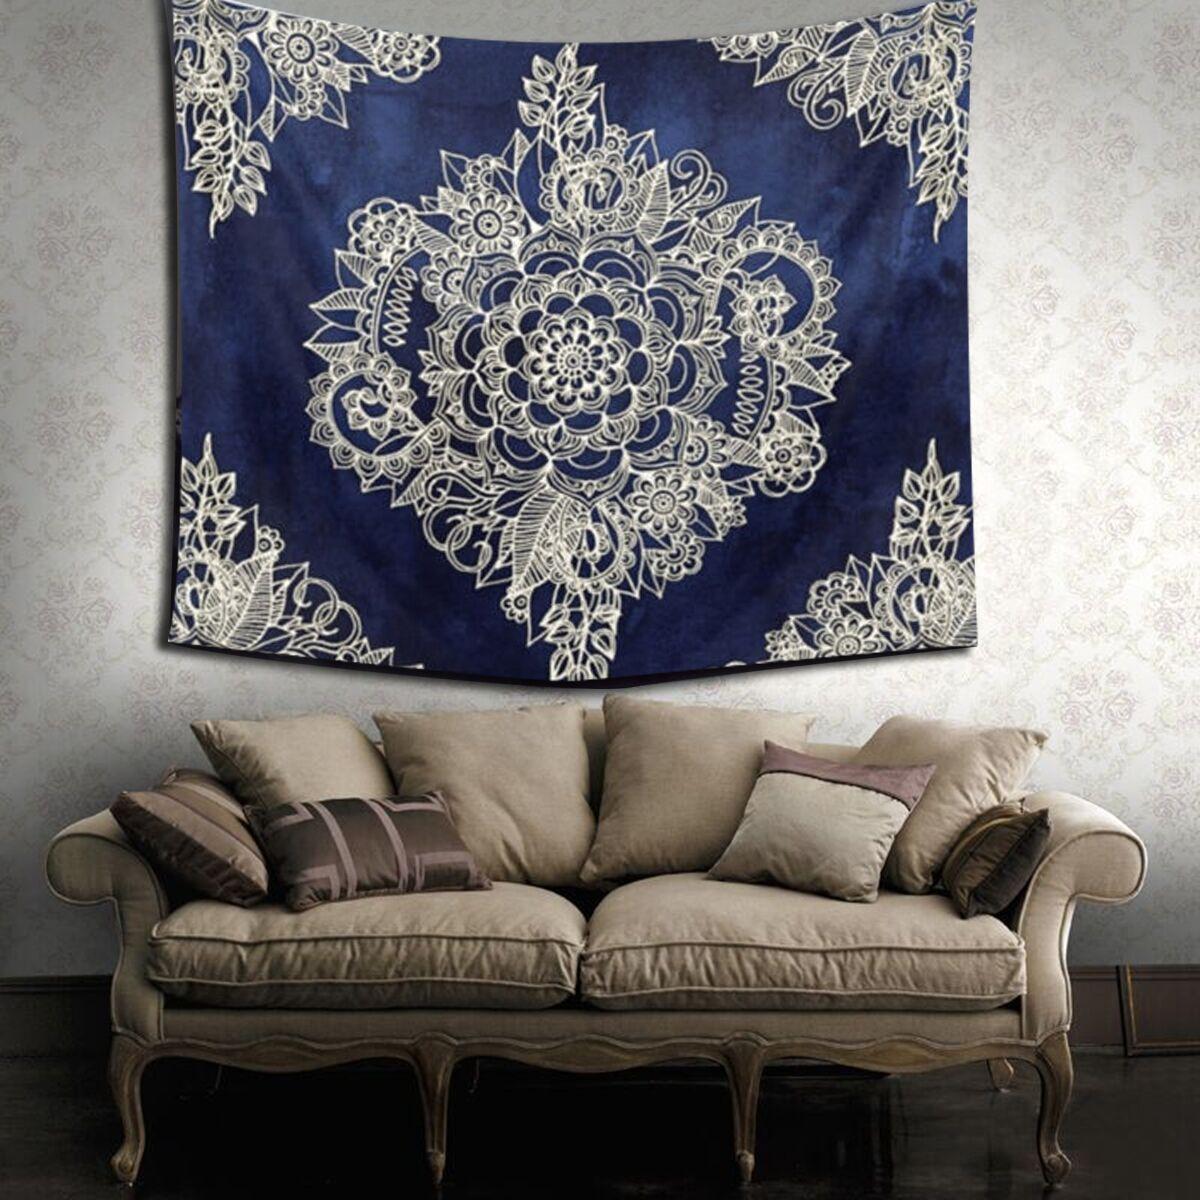 WALL DECOR HIPPIE TAPESTRIES BOHEMIAN MANDALA TAPESTRY WALL HANGING INDIAN THROW